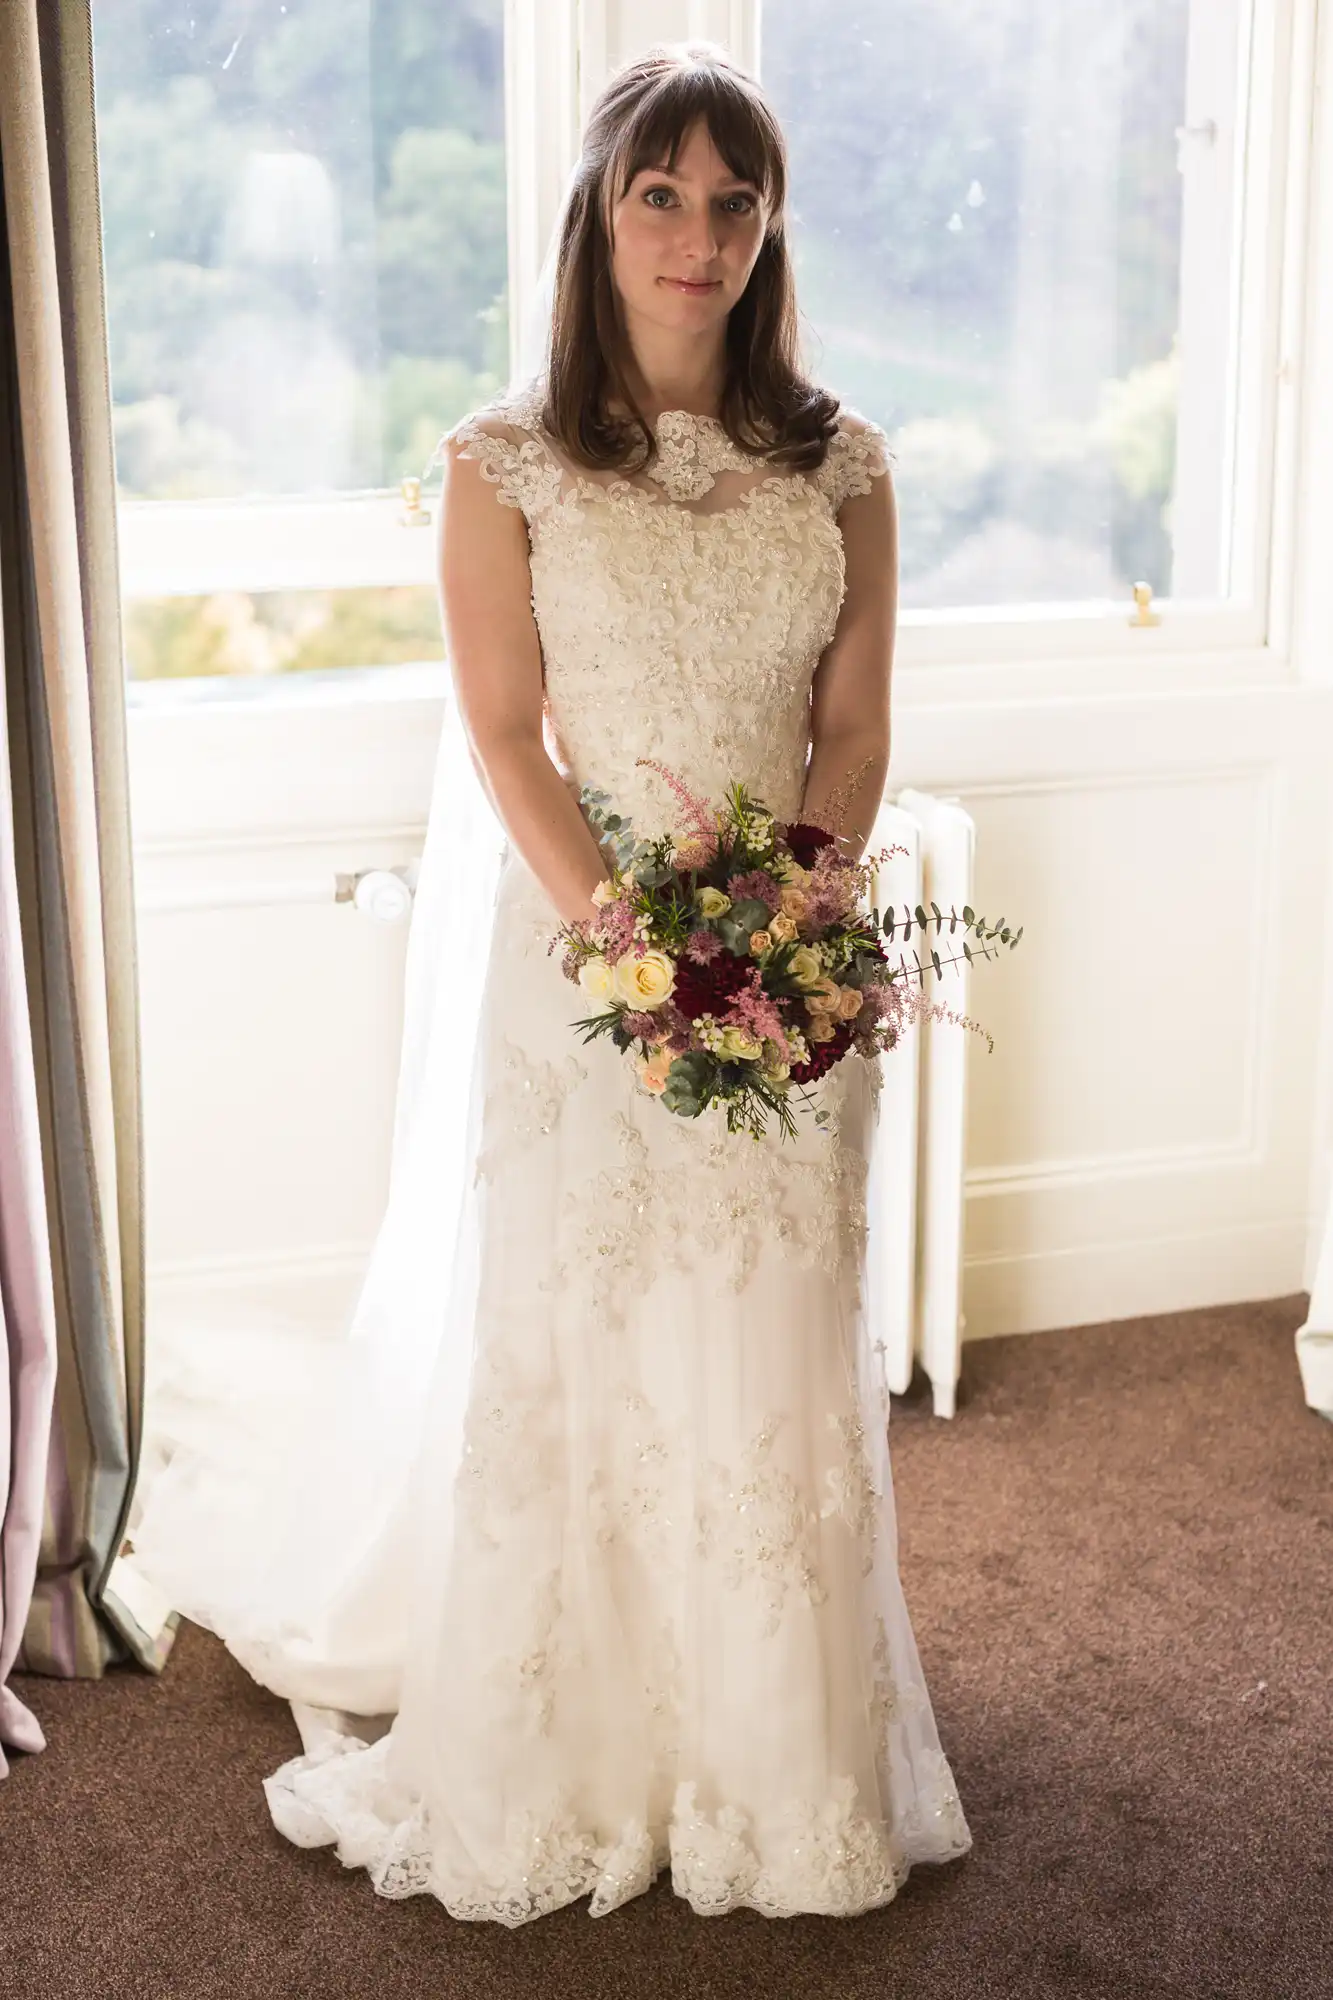 A woman in a white lace wedding dress stands holding a bouquet, with a window behind her casting natural light.